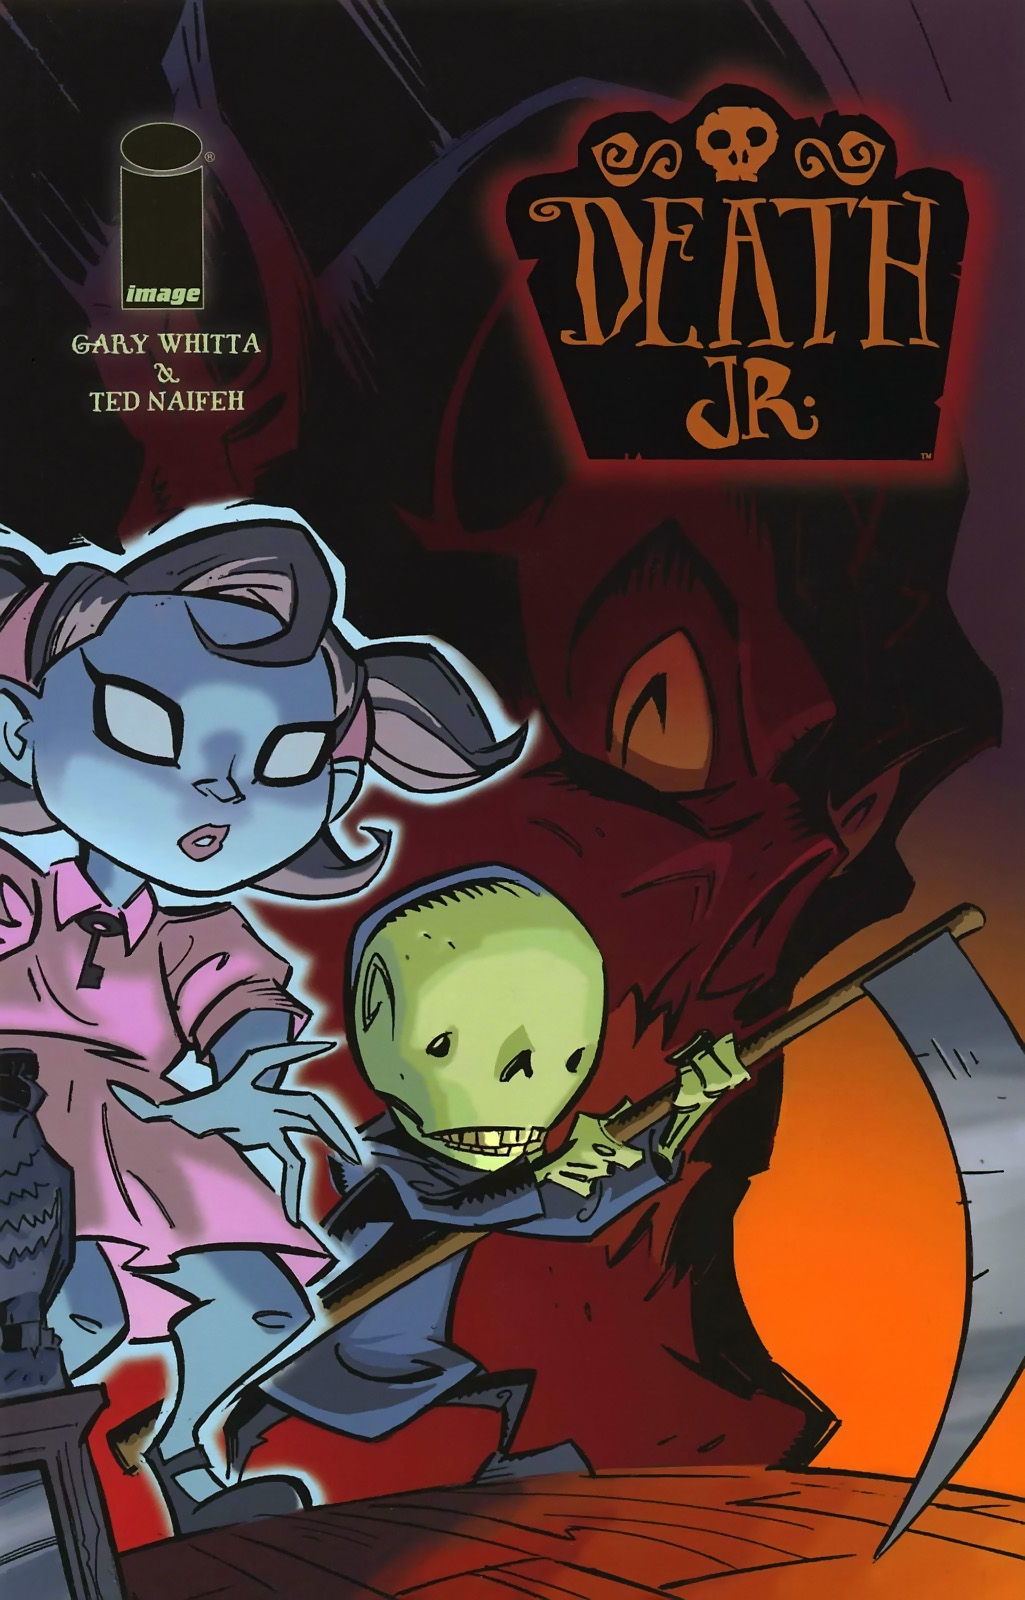 Read online Death Jr. (2005) comic -  Issue #3 - 1